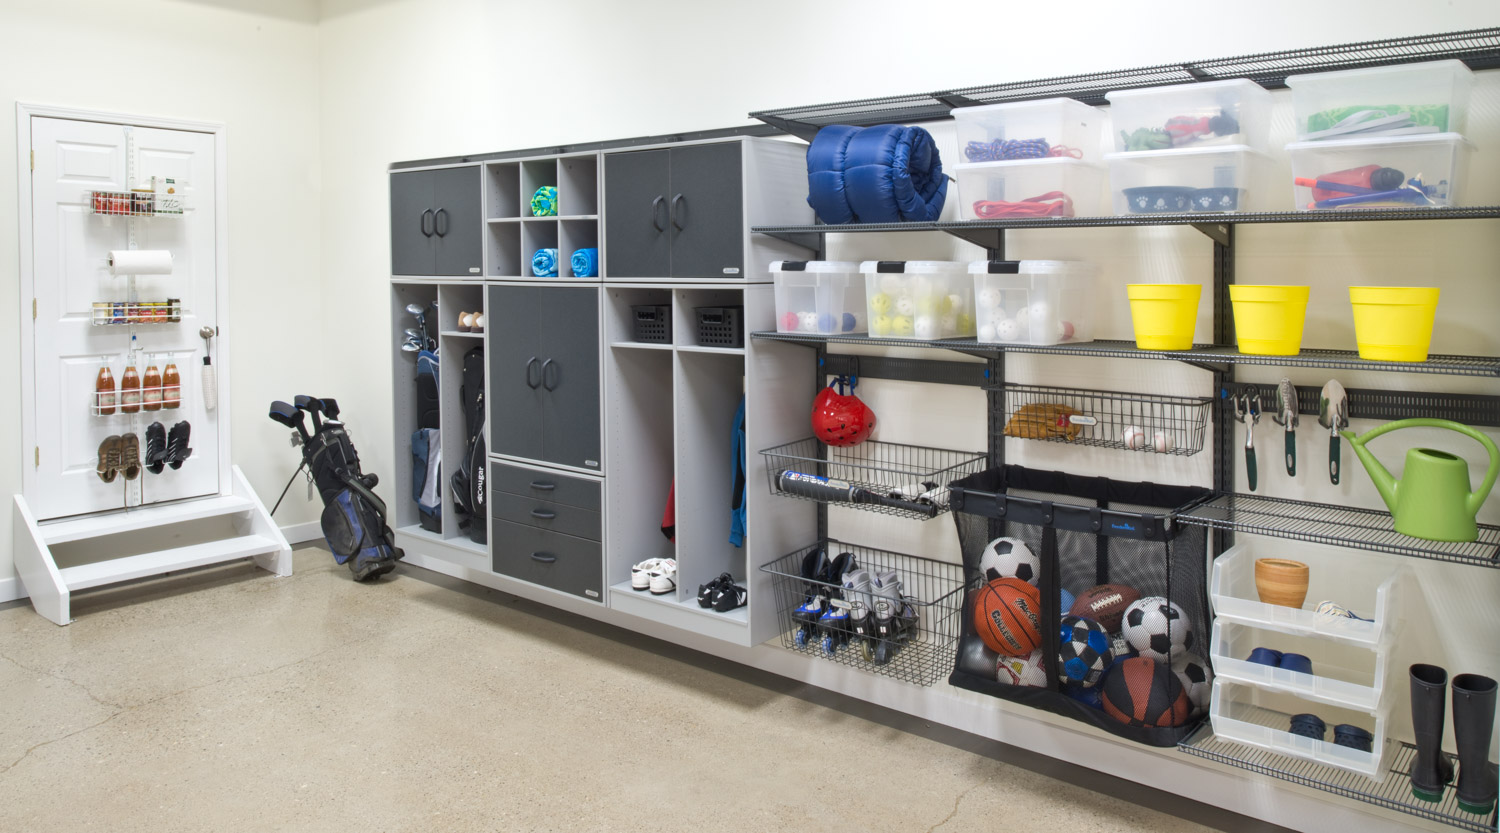 How To Improve The Storage Space in Your Garage